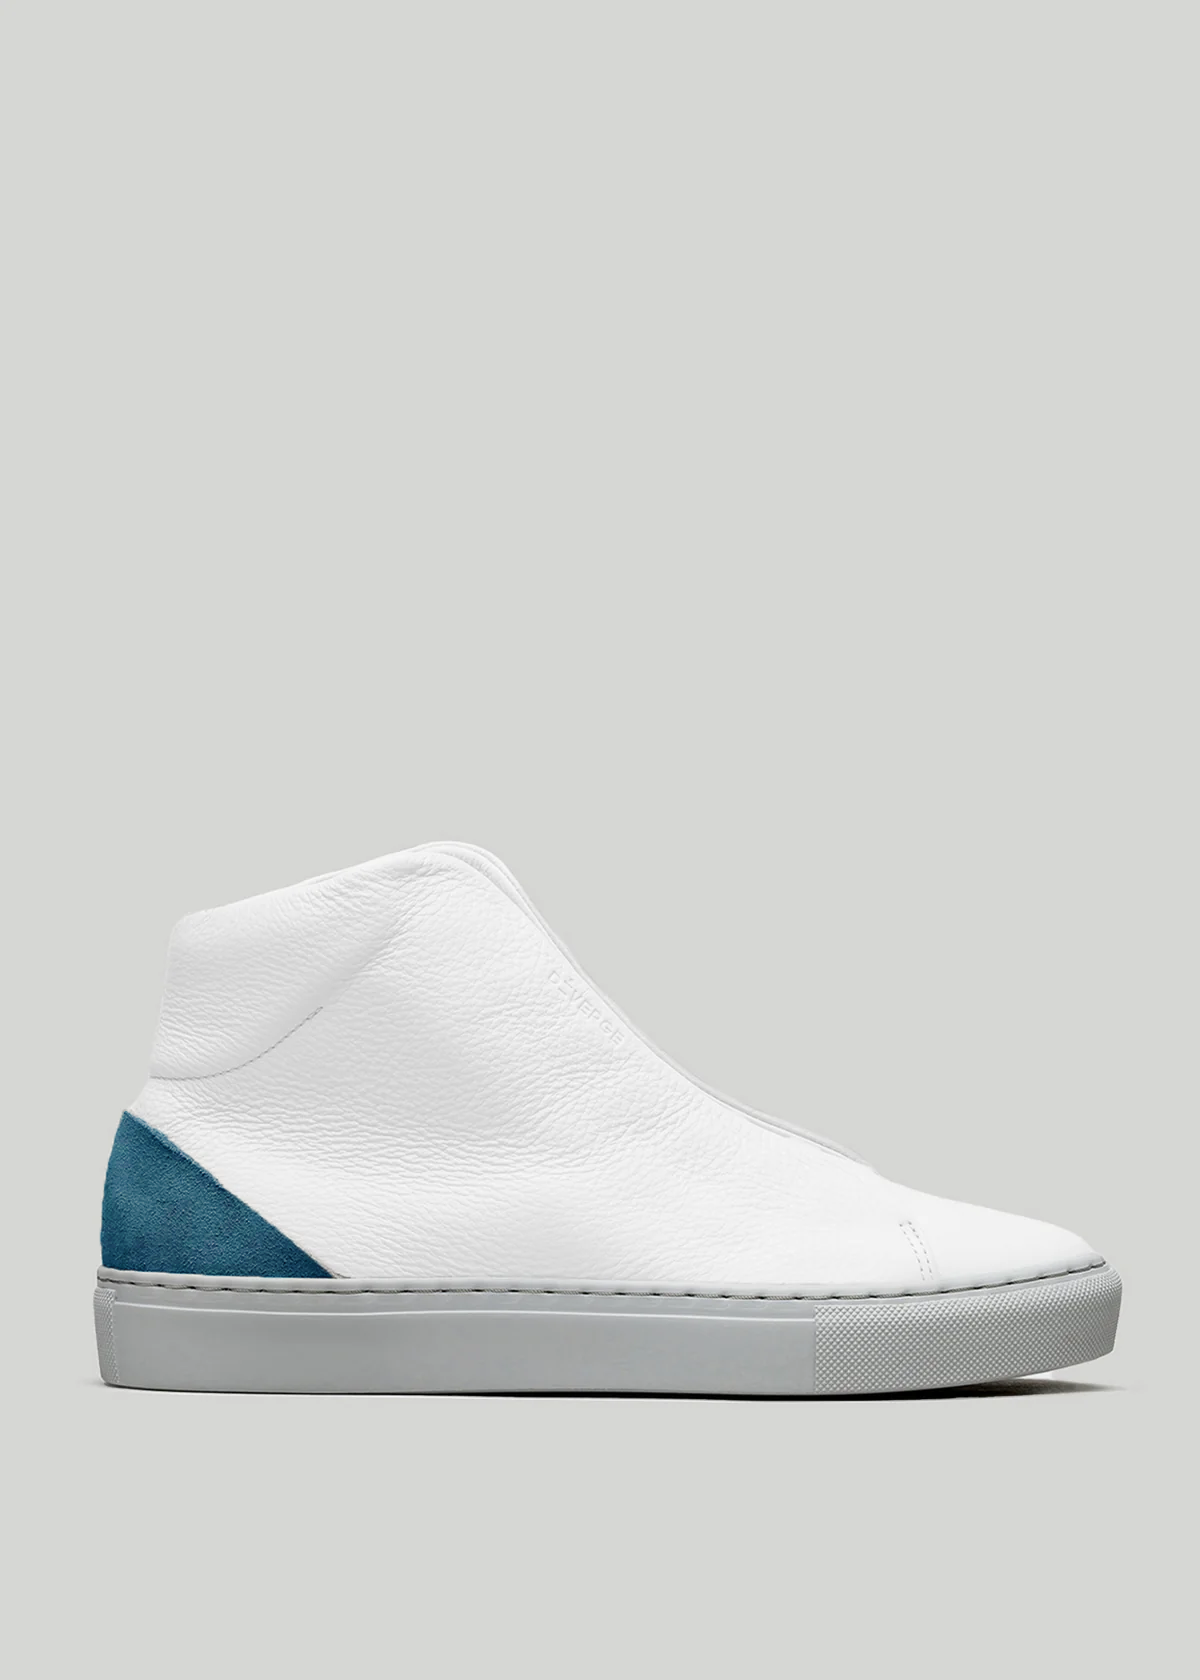 A white high-top sneaker (V40 Petrol Blue W/ Grey) with a grey sole and blue suede detail on the heel, handcrafted in Portugal using vegan synthetic materials, displayed on a plain light grey background.